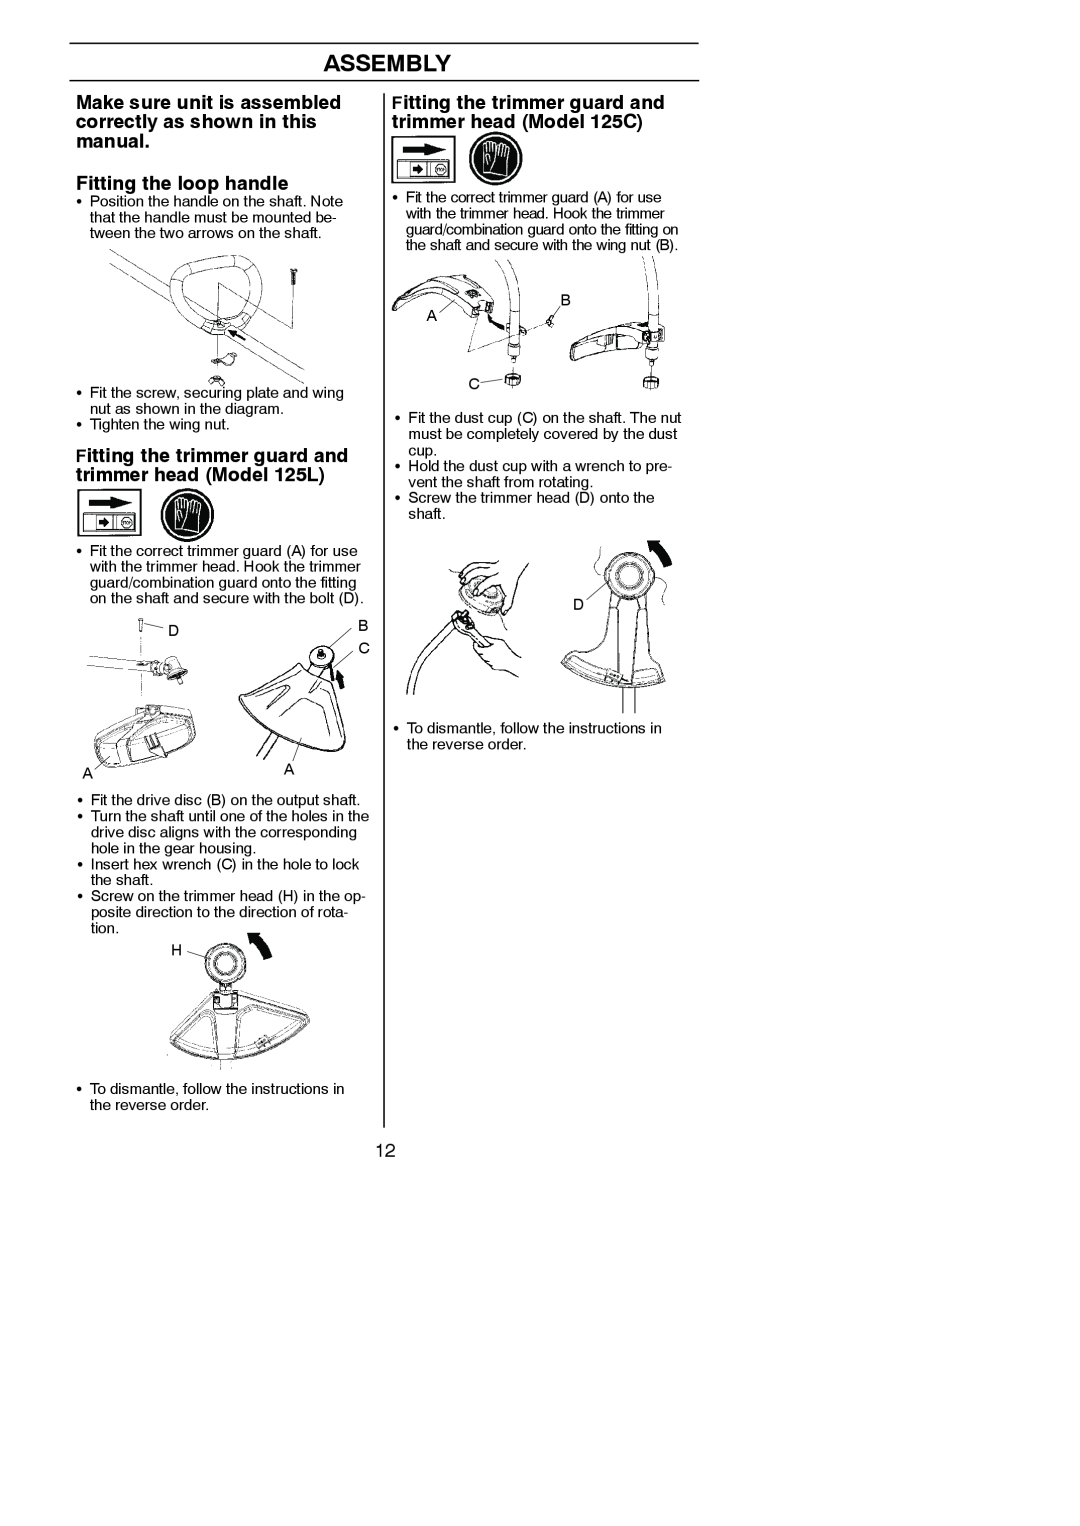 Husqvarna 125C, 125L Assembly, Make sure unit is assembled correctly as shown in this manual, Fitting the loop handle 